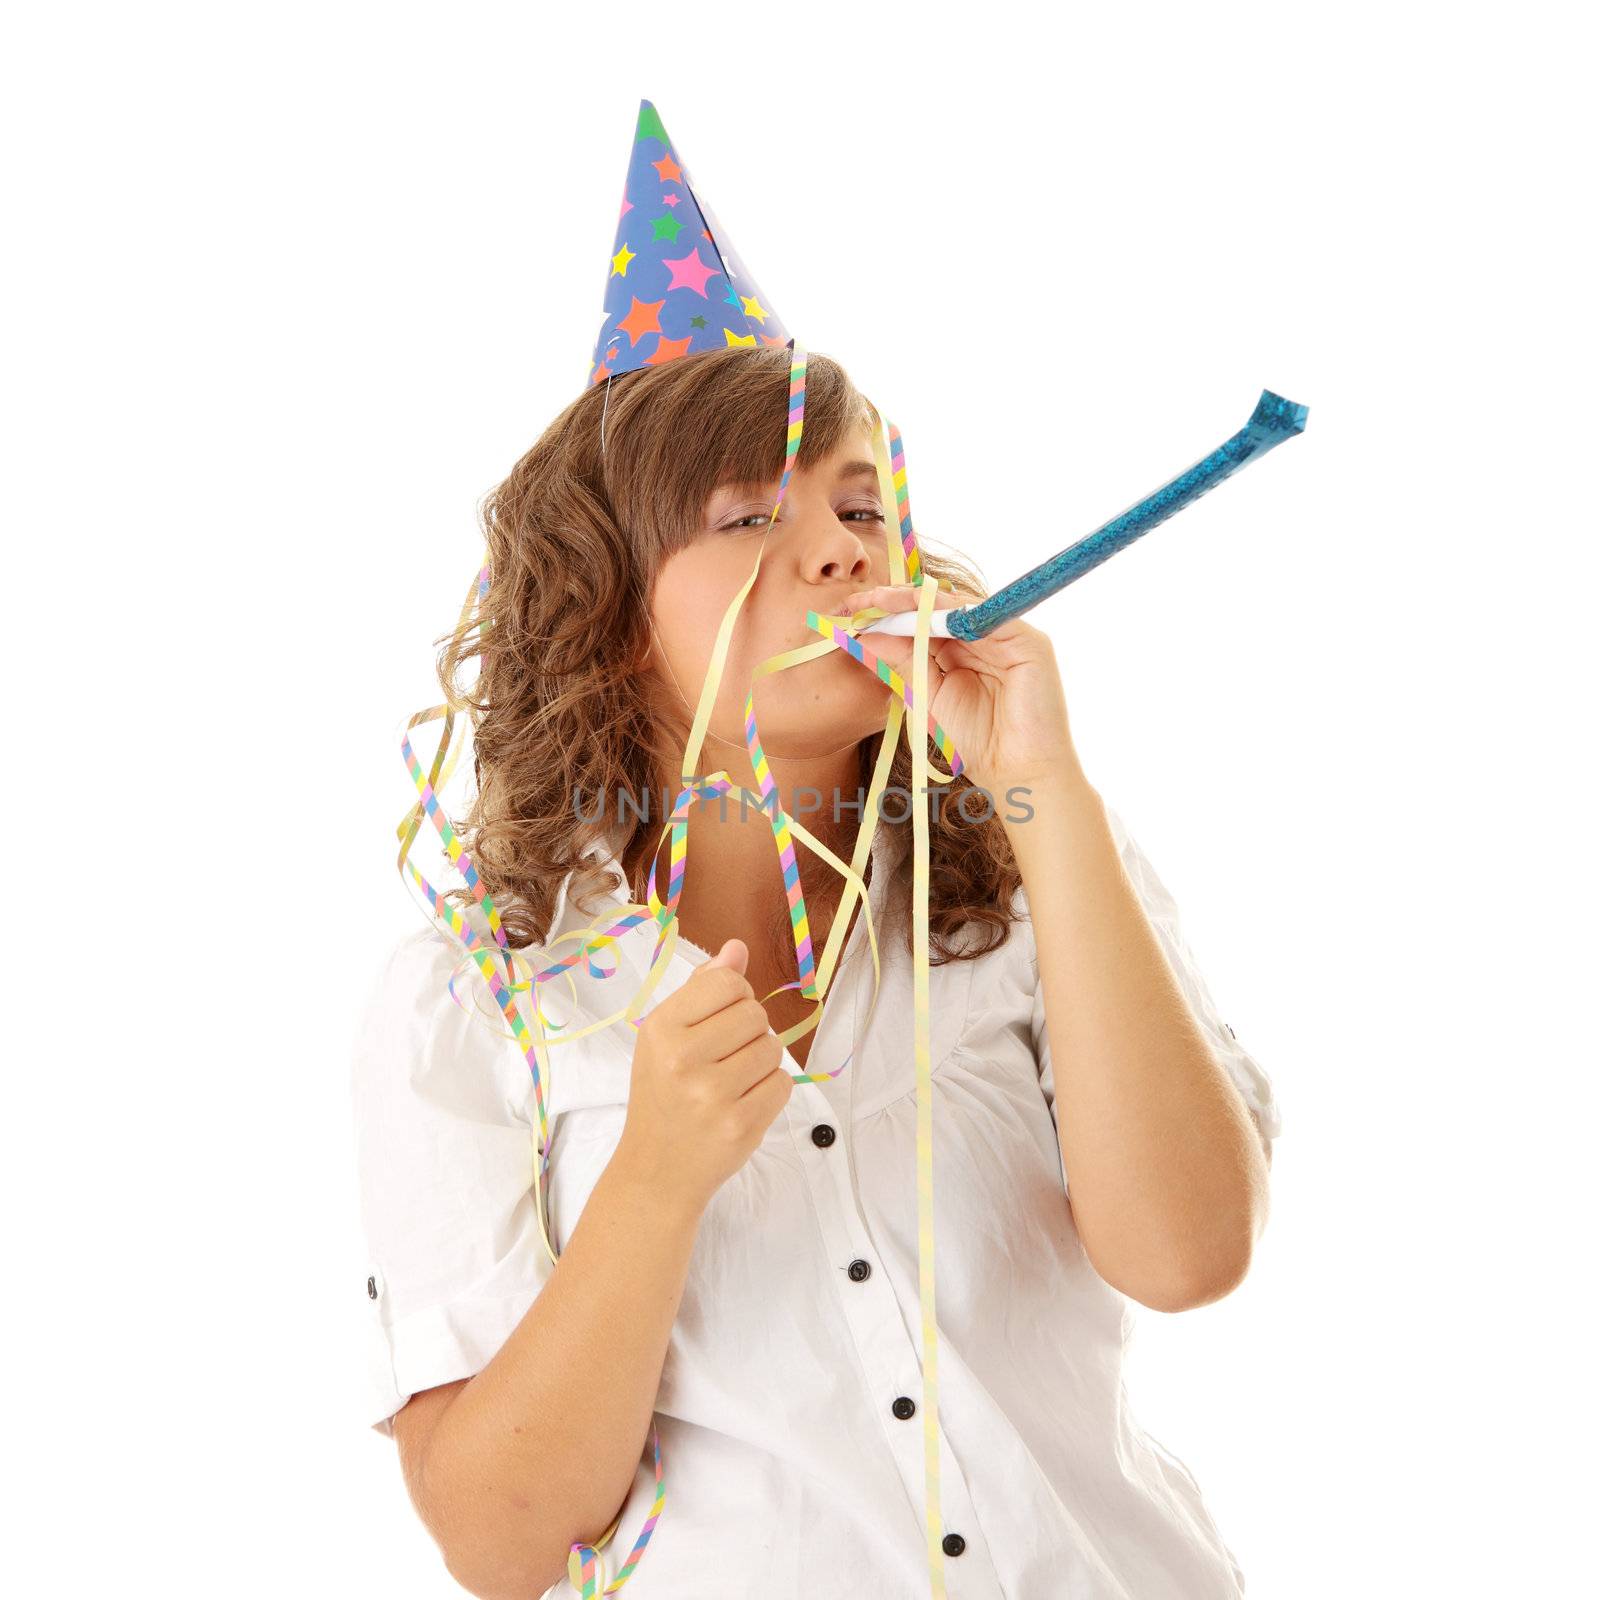 Young woman in business siut wearing party favors